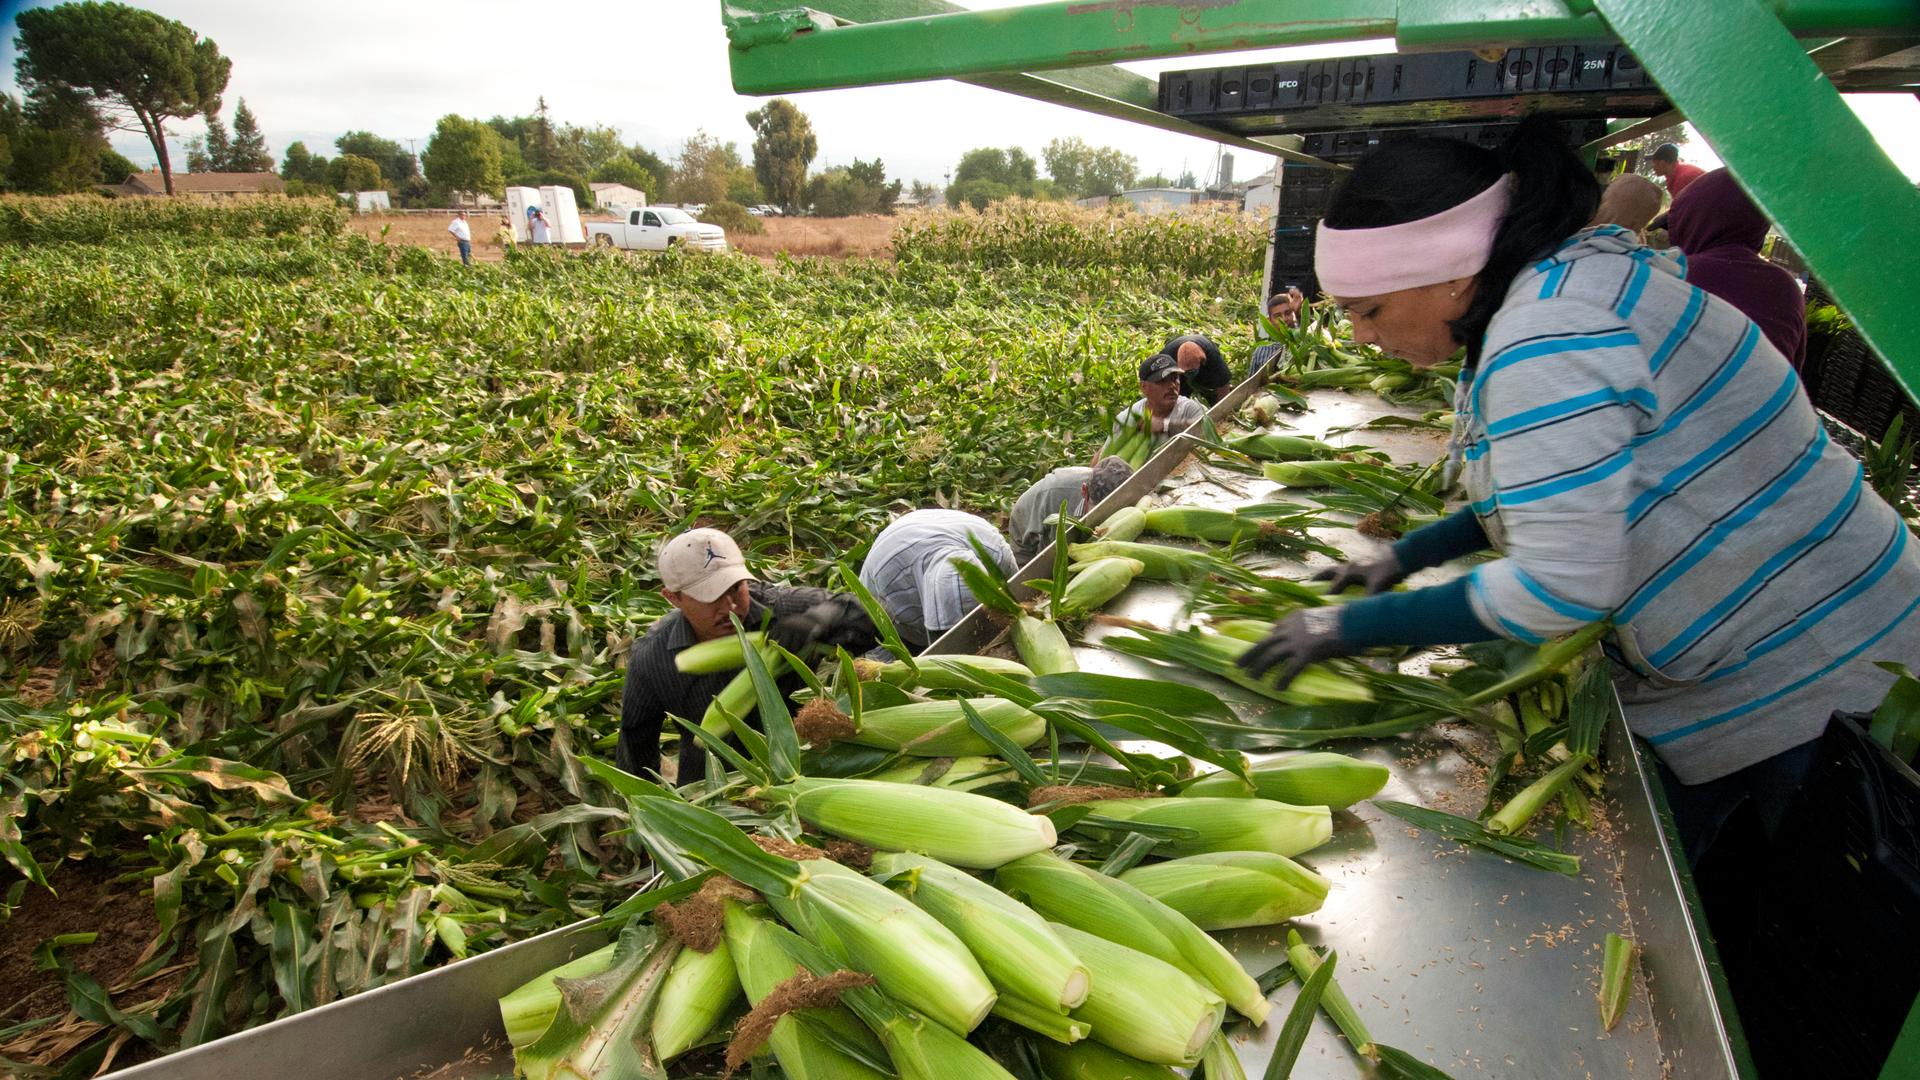 Migrant workers harvest corn on Uesugi Farms in Gilroy, California.